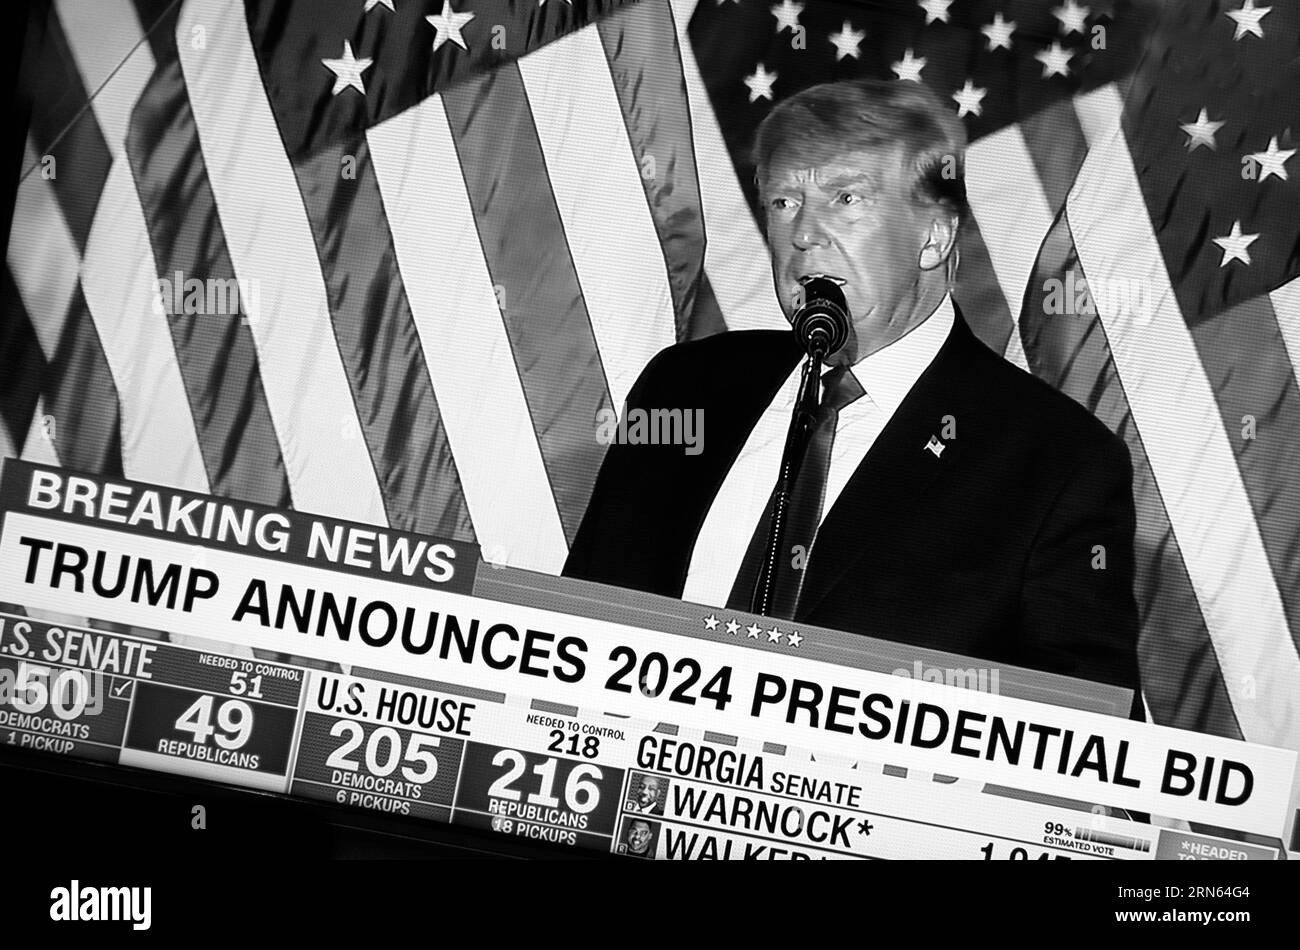 A CNN TV screenshot, colorized digitally,  showing former U.S. President Donald Trump announcing his candidacy for a second term as U.S. President. Stock Photo